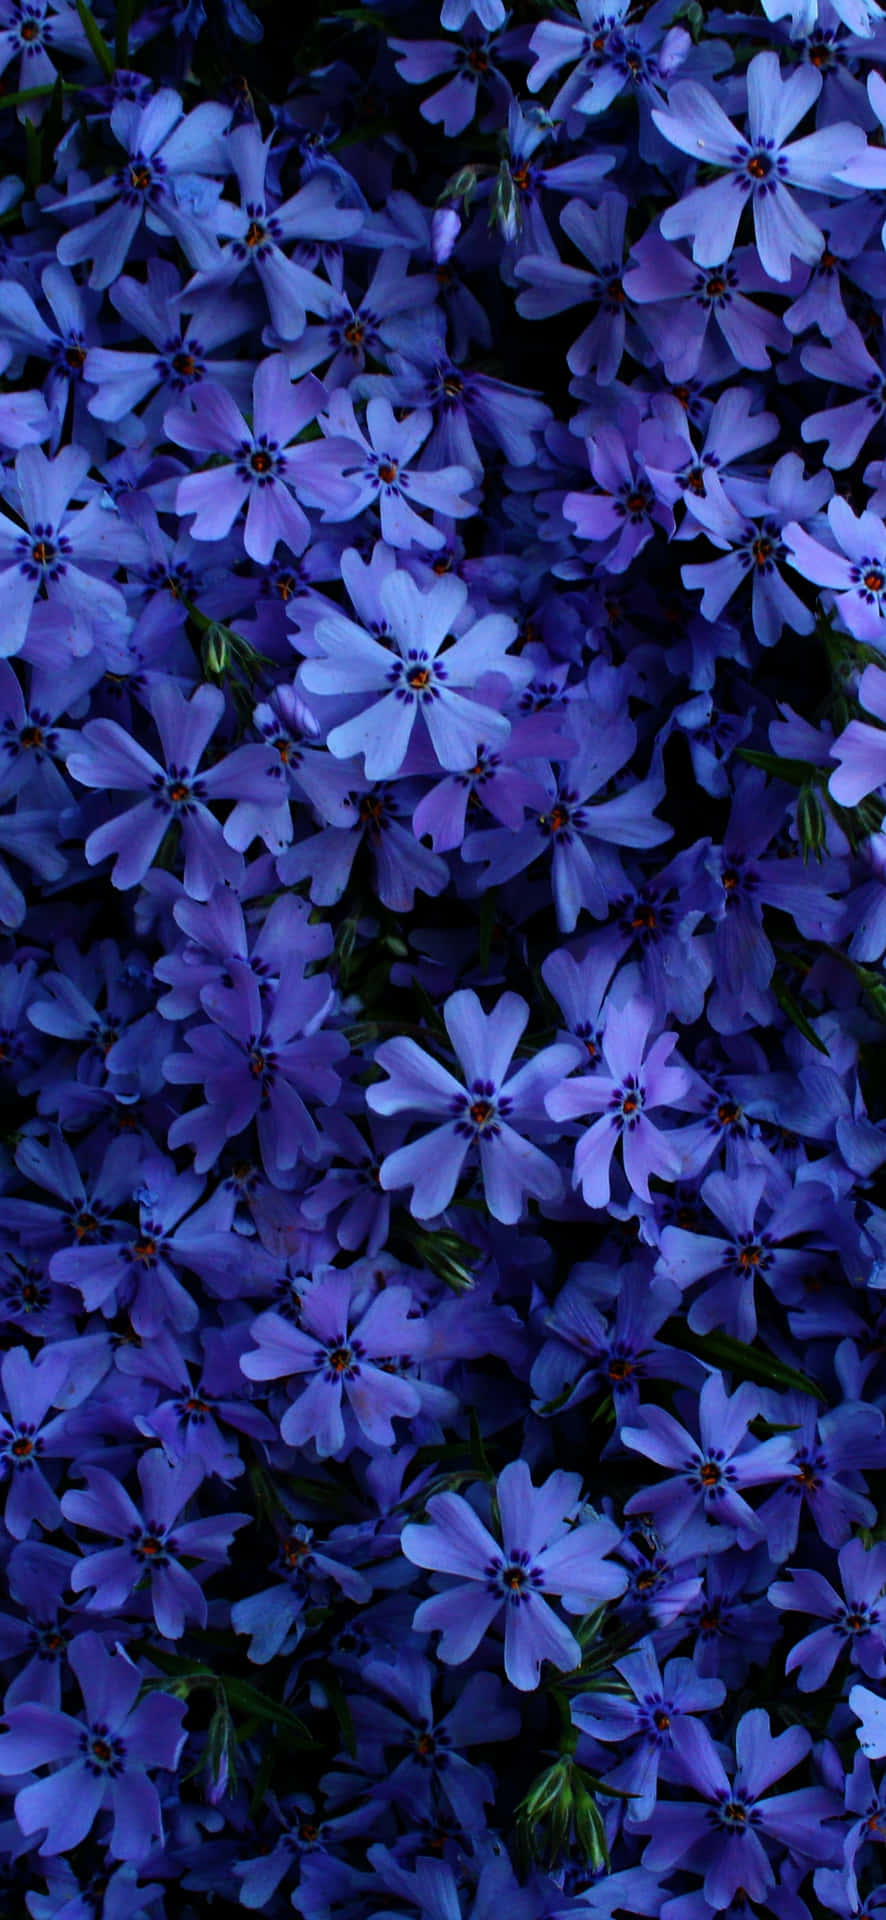 A Bunch Of Blue Flowers